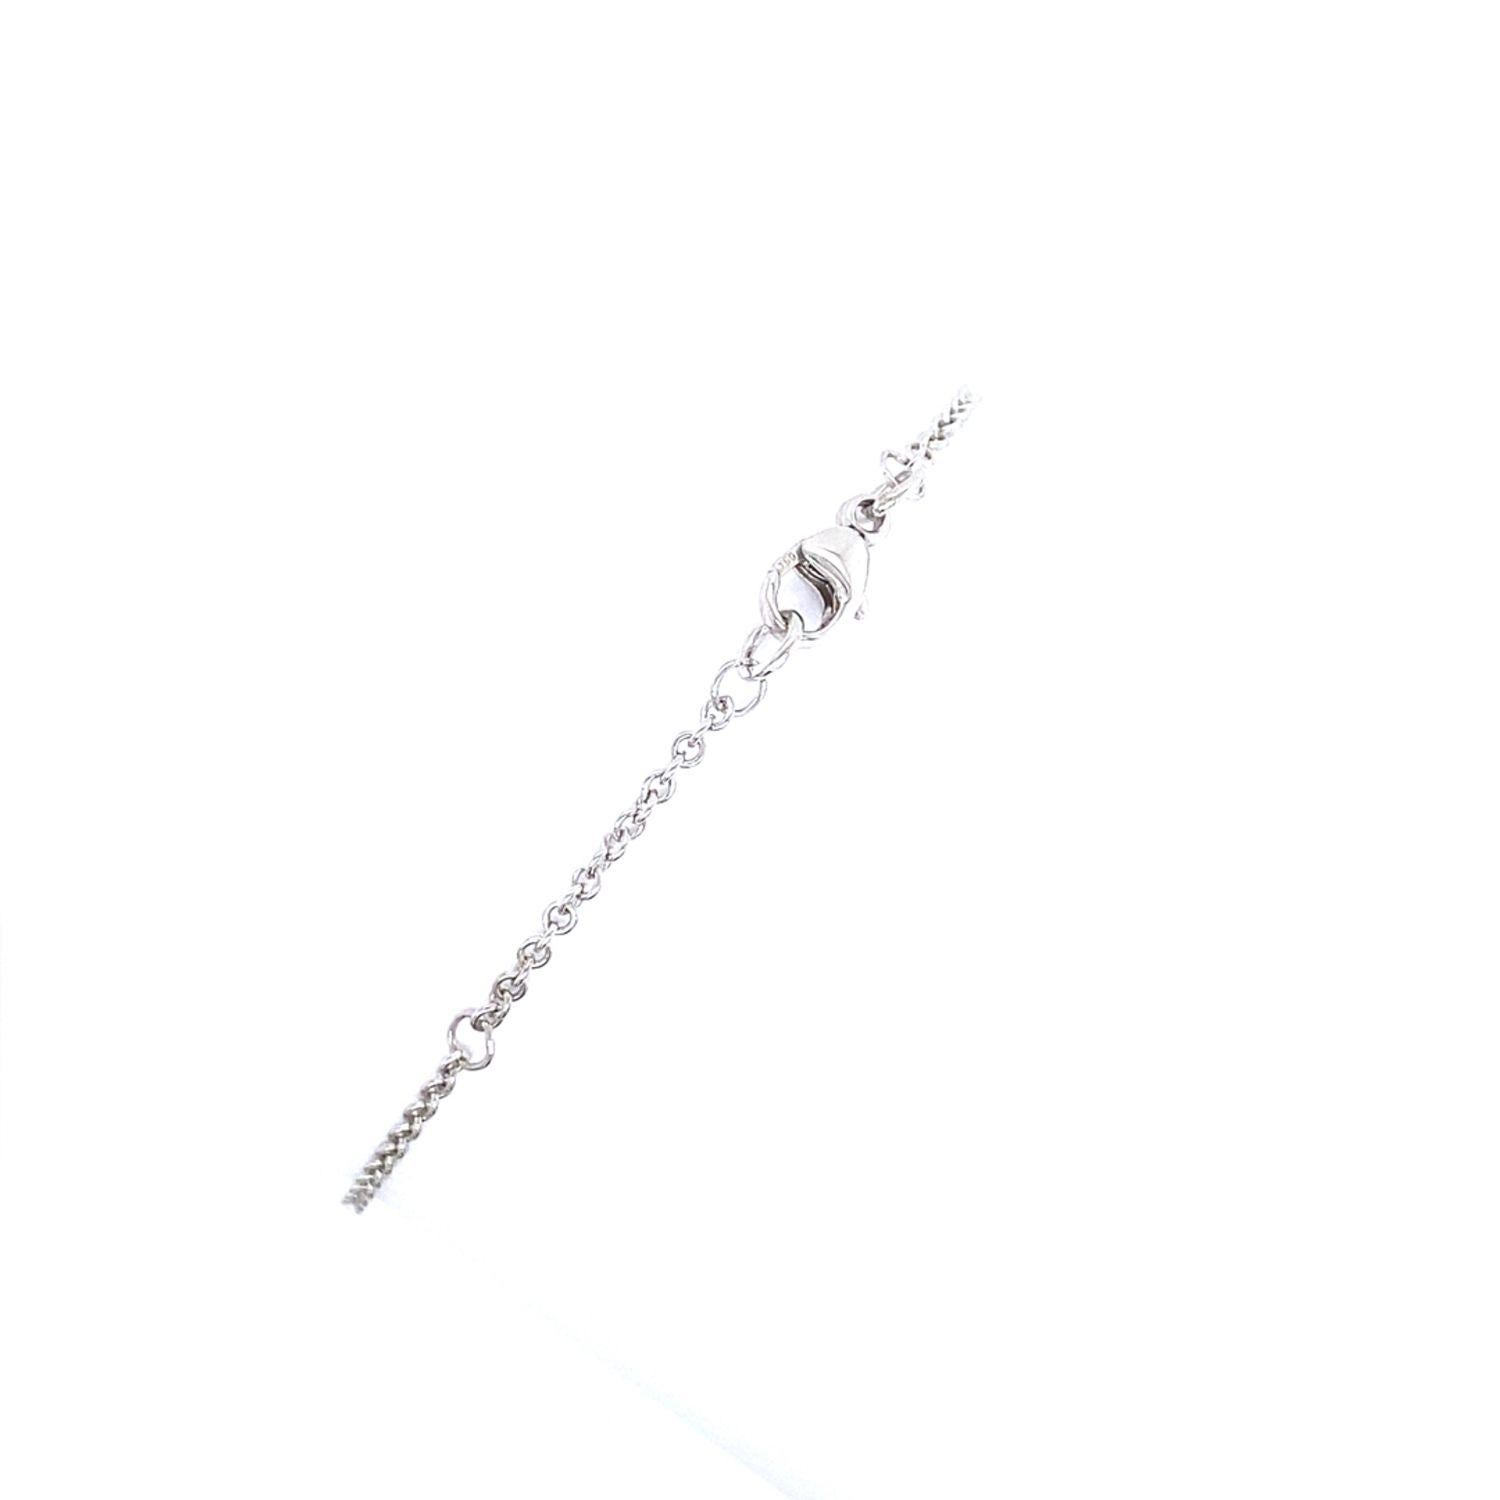 18ct White Gold Tennis/Chain Bracelet, Set With 5 Round Brilliant Cut Diamonds

Additional Information:
Total Diamond Weight: 0.55ct
Diamond Colour: G/H
Diamond Clarity: SI1
Total Weight: 2.8g
Diamond Head Size: L 17.8 mm x W 3.3mm
SMS4935